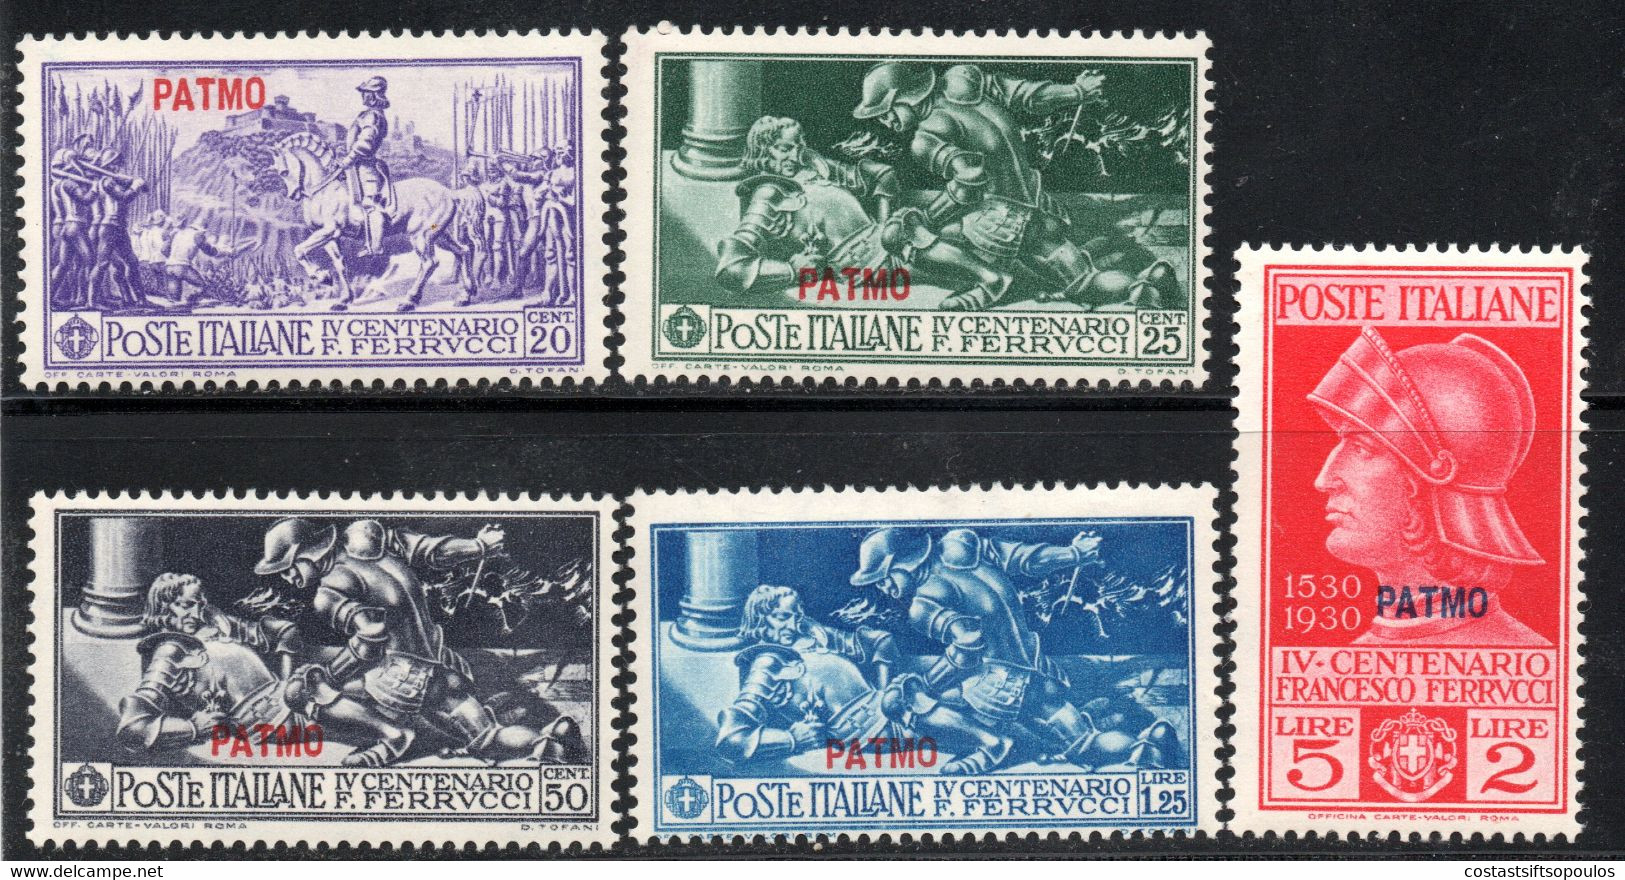 714.GREECE.ITALY,DODECANESE.1930 FERRUCCI.PATMO  # 59-63 MNH - Dodecanese